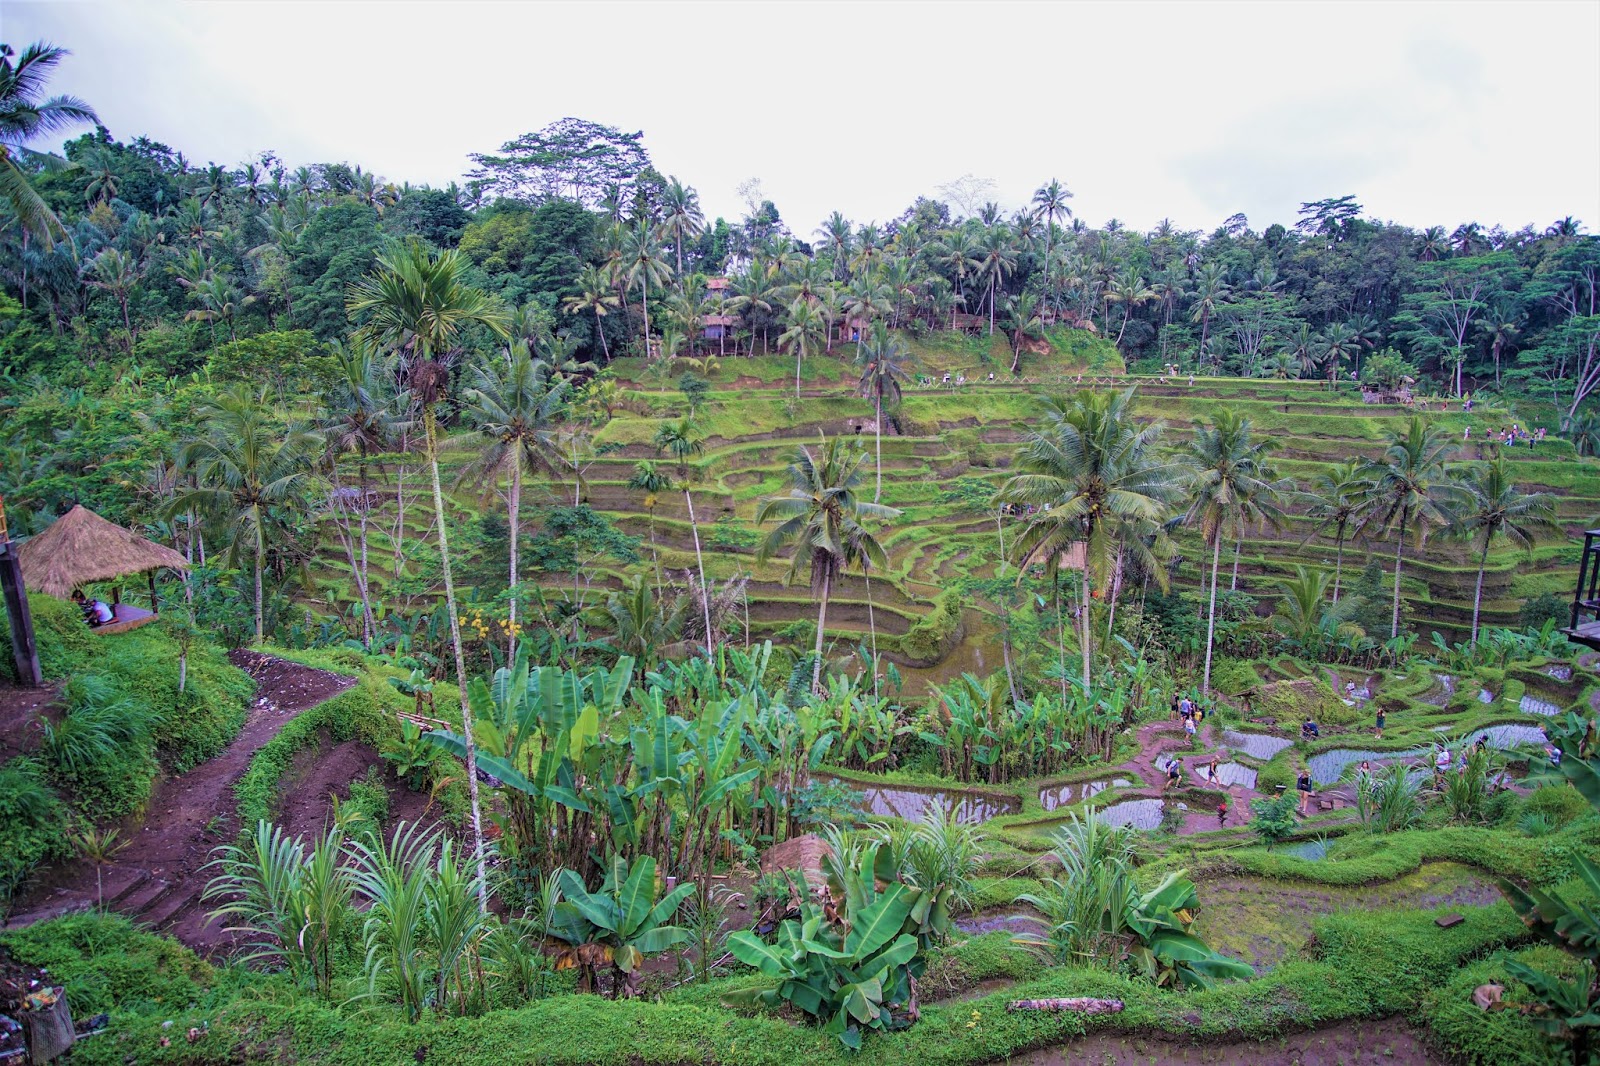 Tegallalang Rice Terrace Most Photographed Rice Fields In Bali